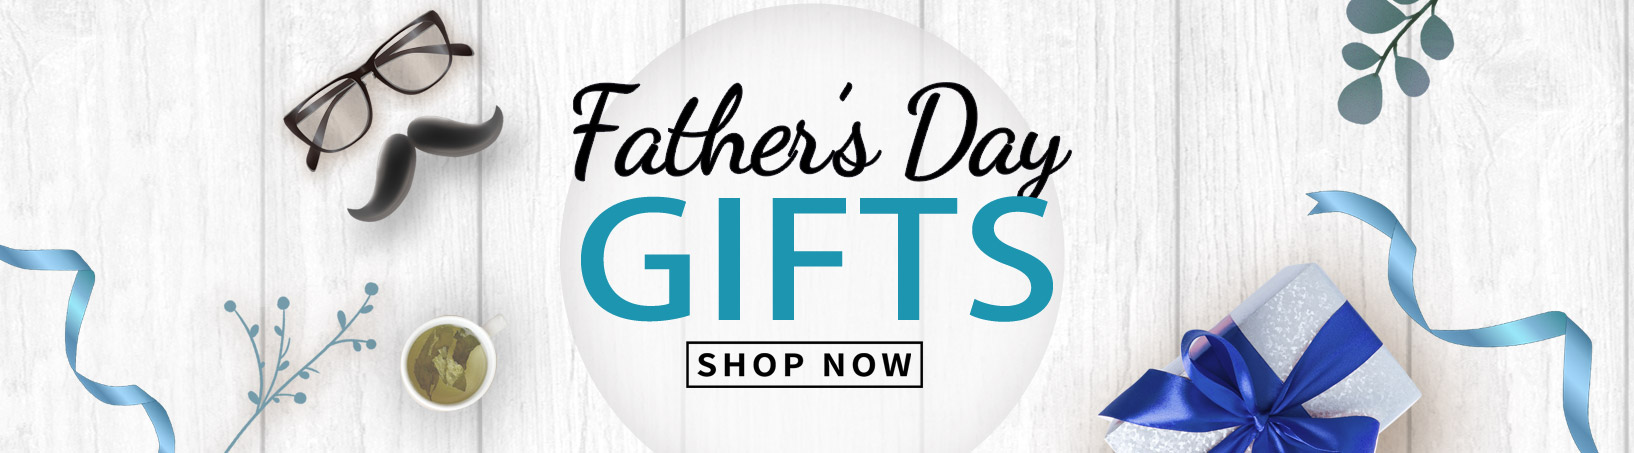 fathers-day-banner-for-website.jpg